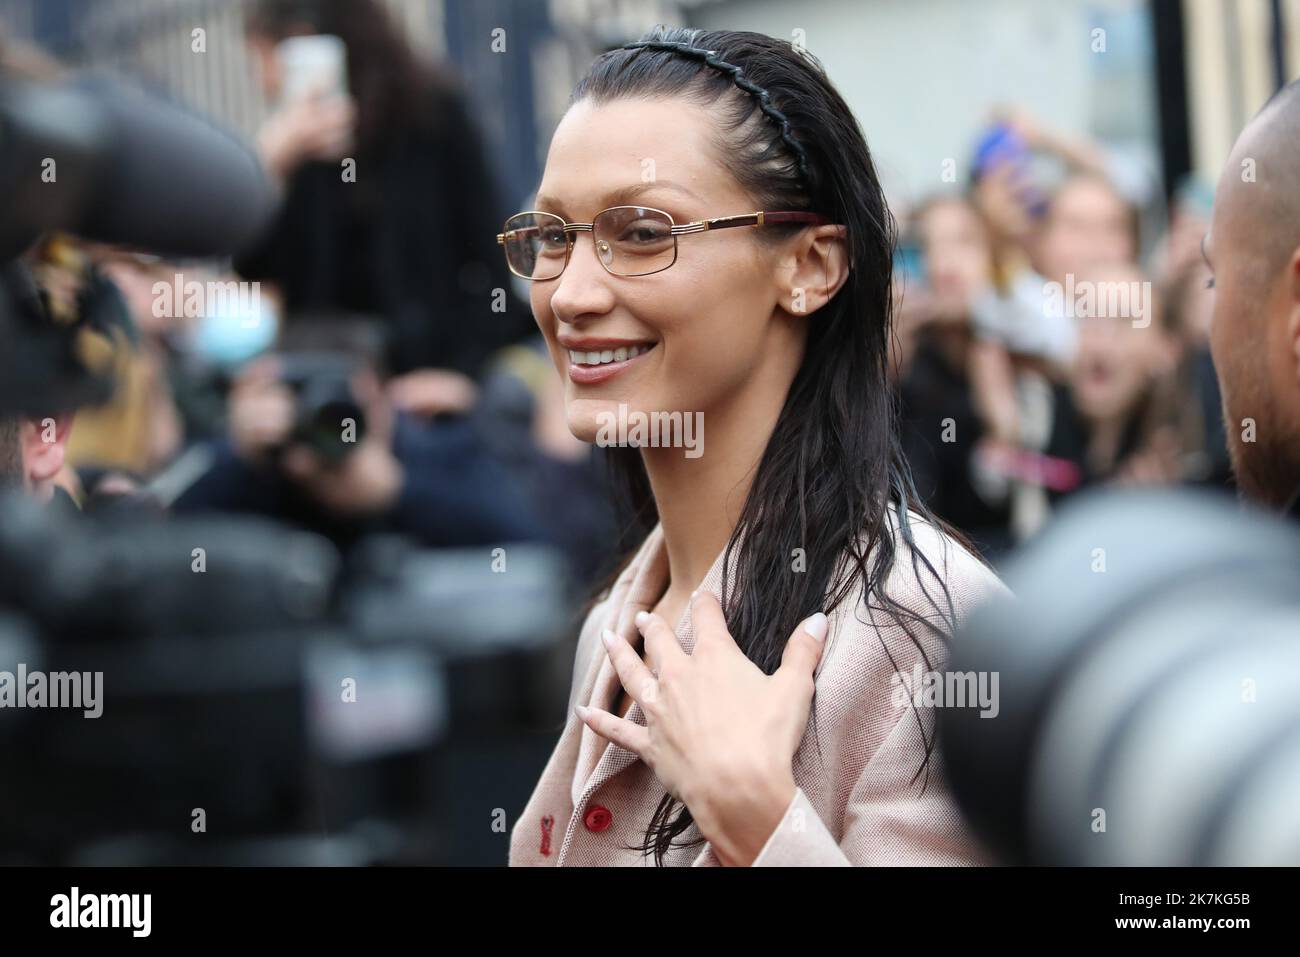 Paris, France. 25th June, 2021. Bella Hadid attending the Dior Homme  Menswear Spring Summer 2022 show as part of Paris Fashion Week in Paris,  France on June 25, 2021. Photo by Aurore